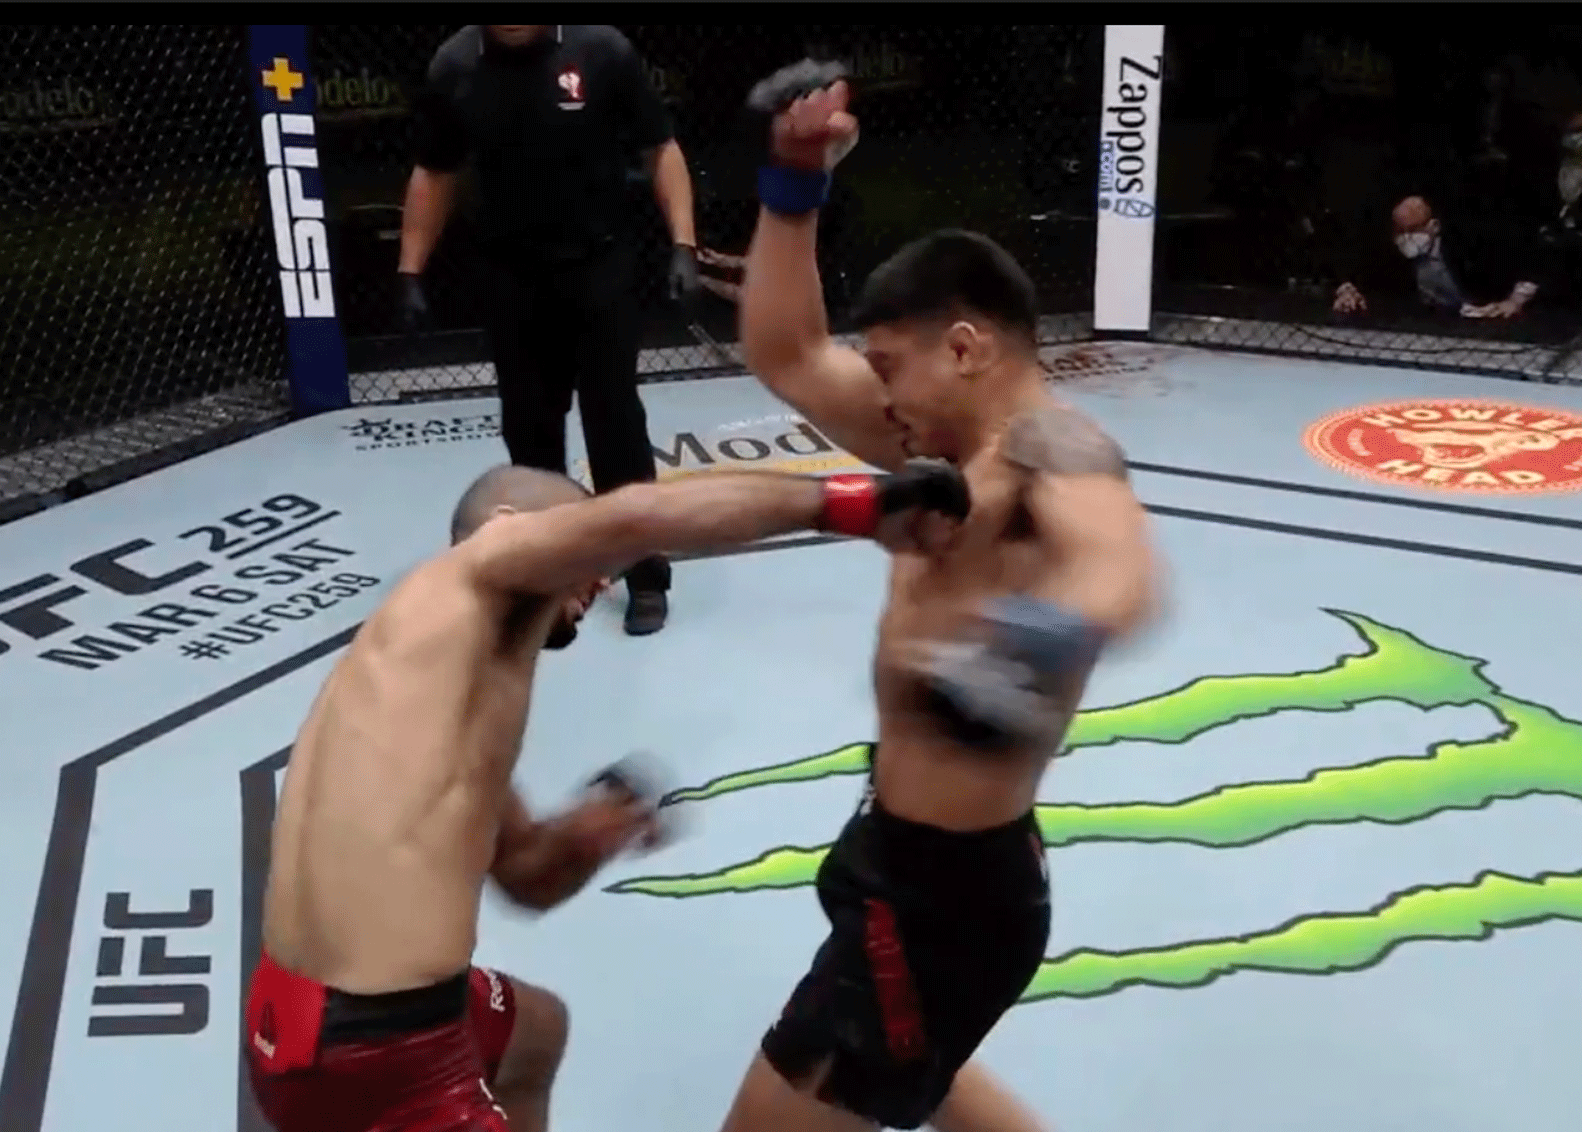 Snel UFC knock-out rentree MMA-vechter (video)